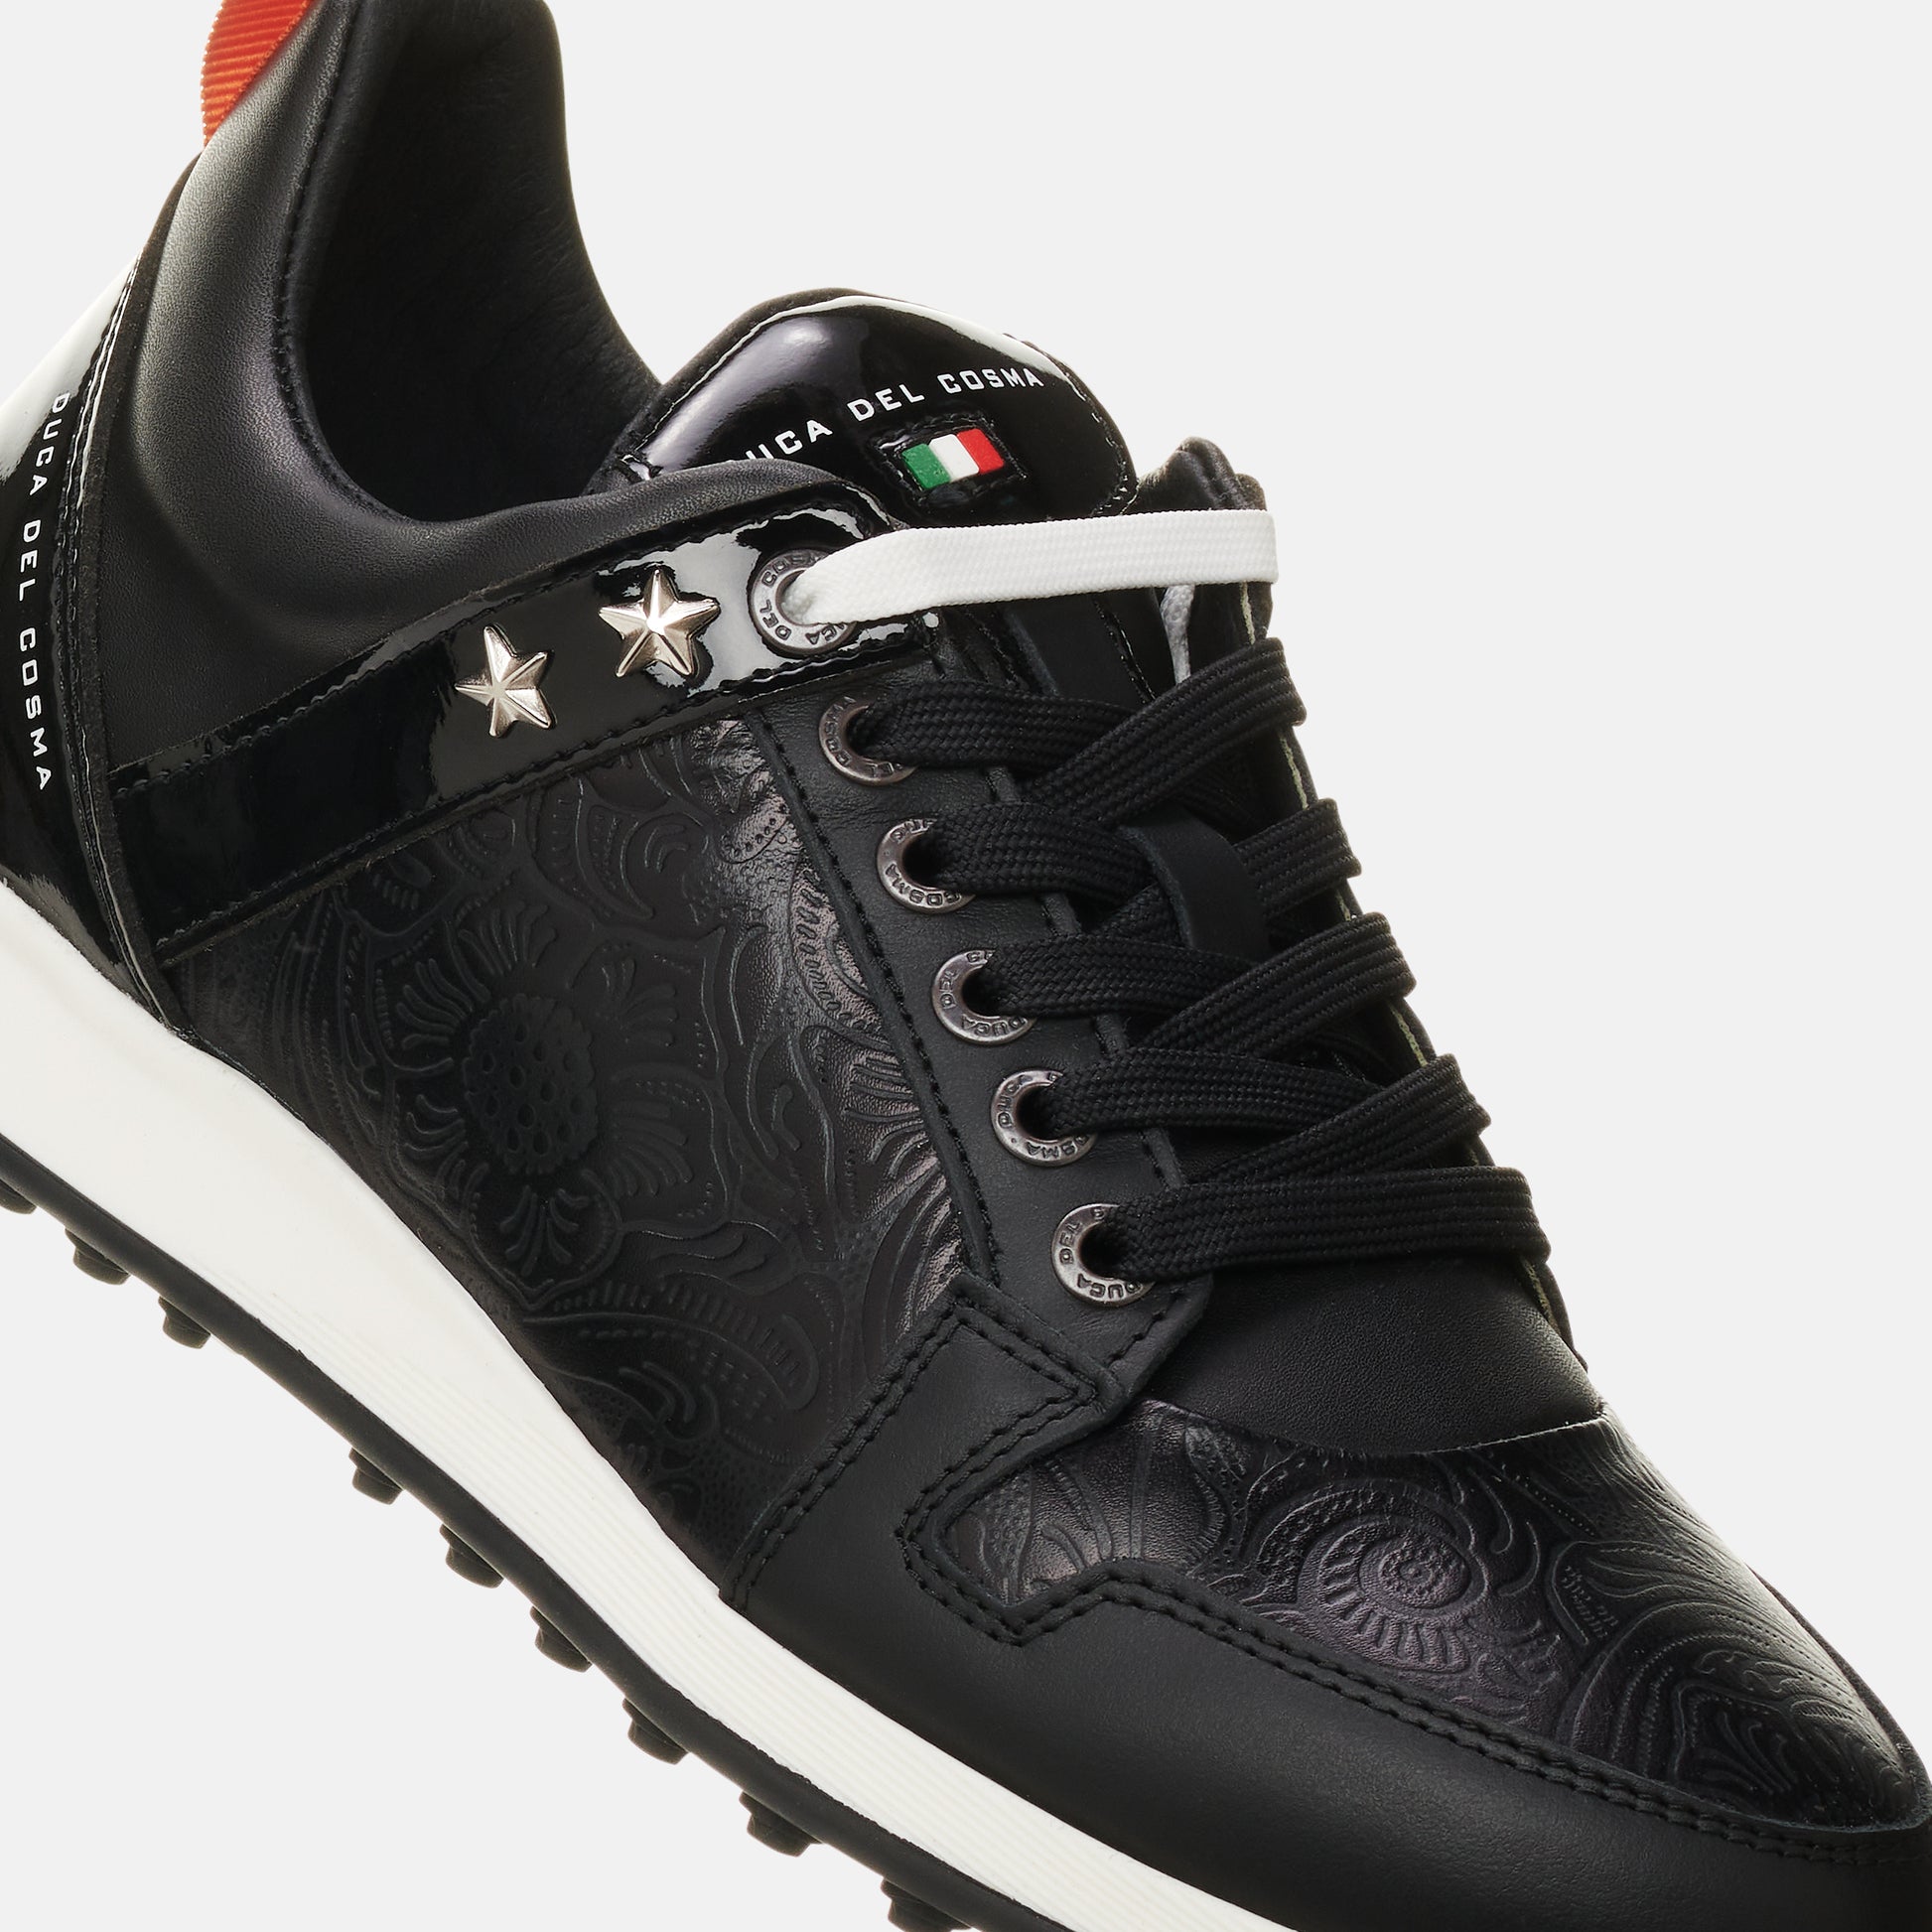 Duca del Cosma MJ Black women's golf shoe is stylish and waterproof for on and off the golf course